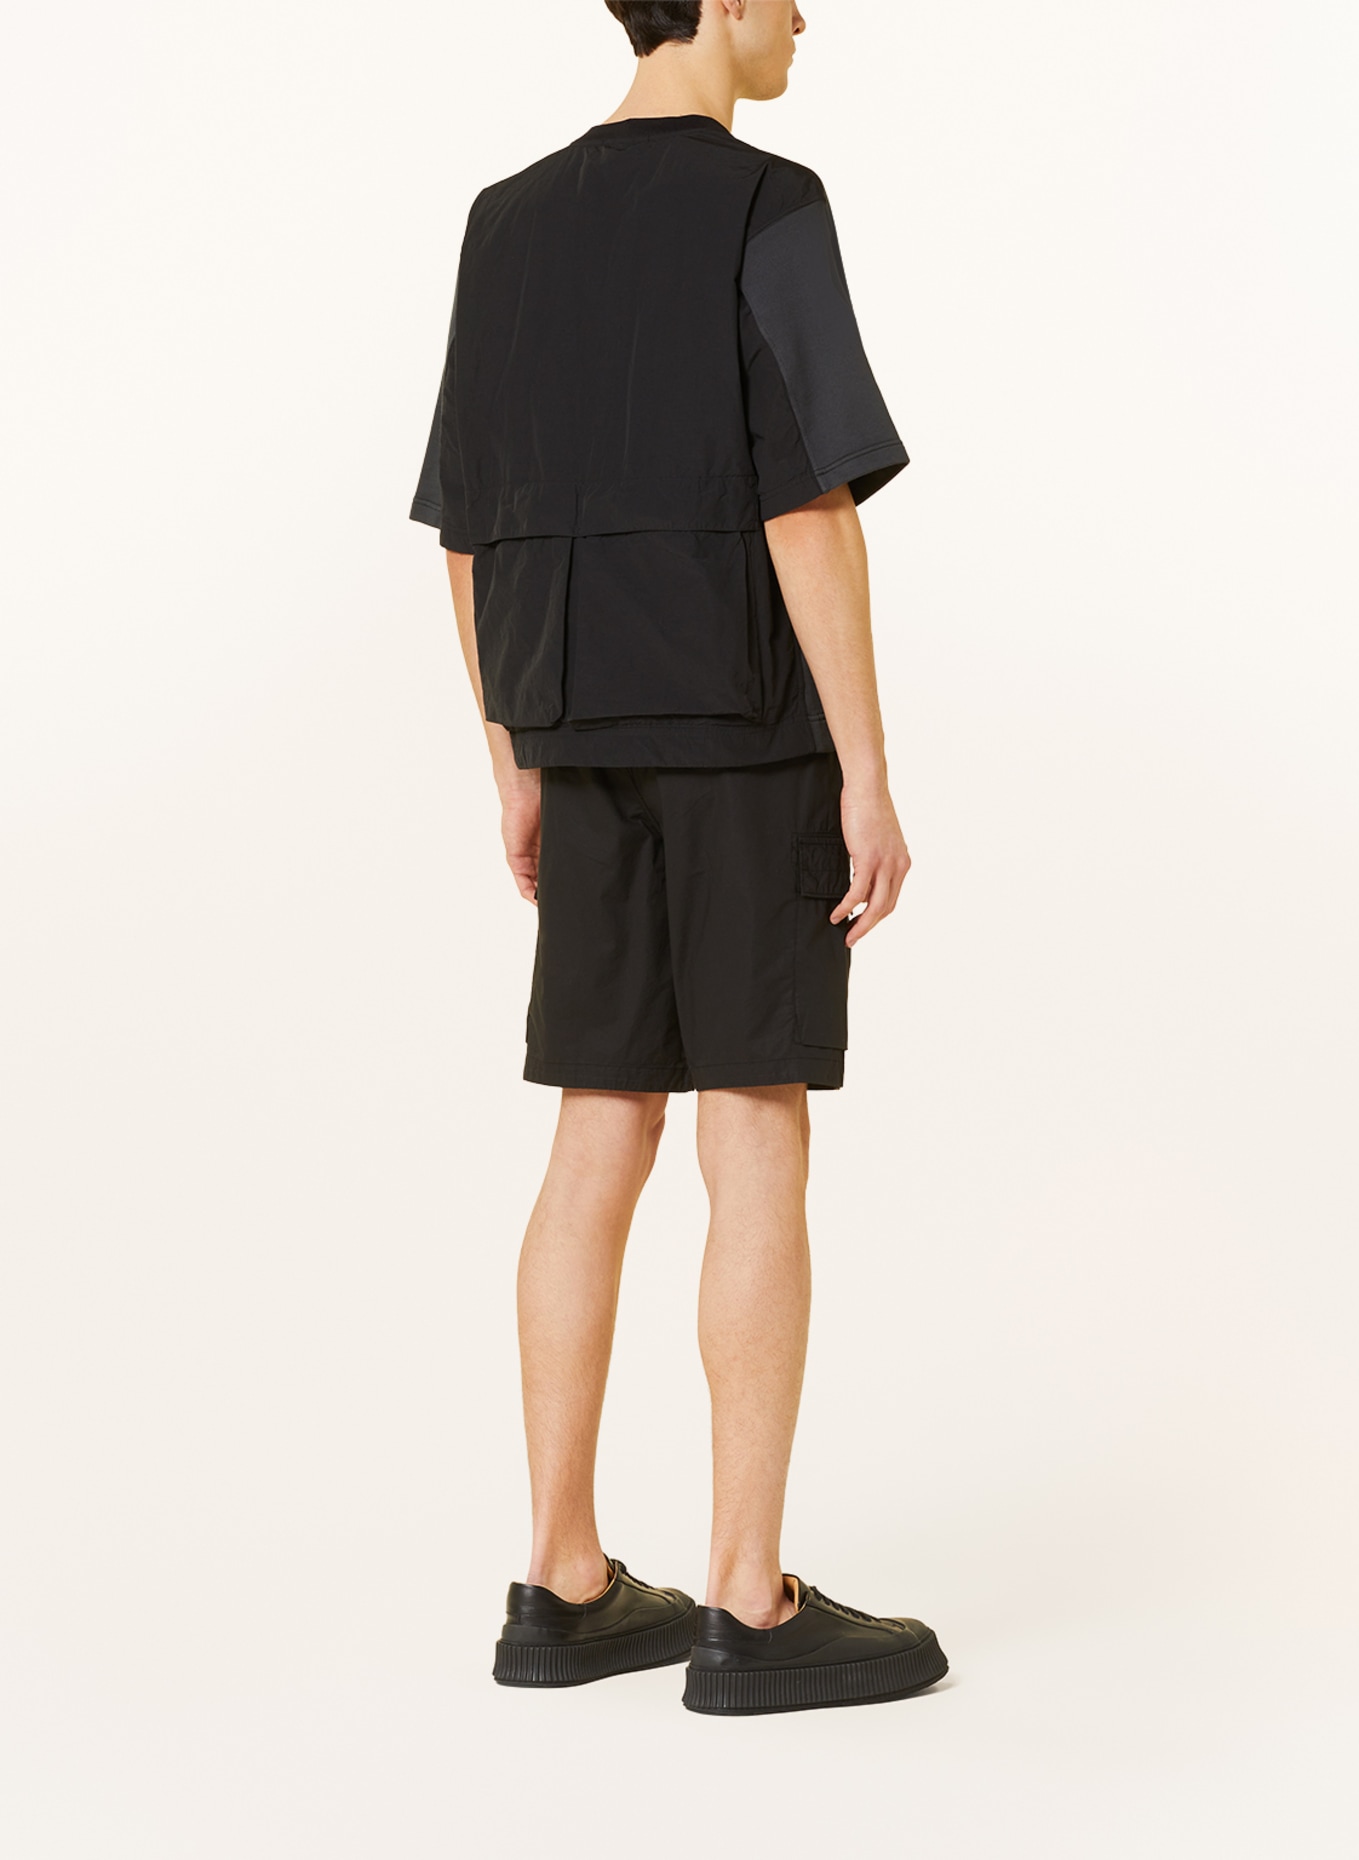 STONE ISLAND T-shirt in mixed materials, Color: DARK GRAY (Image 3)